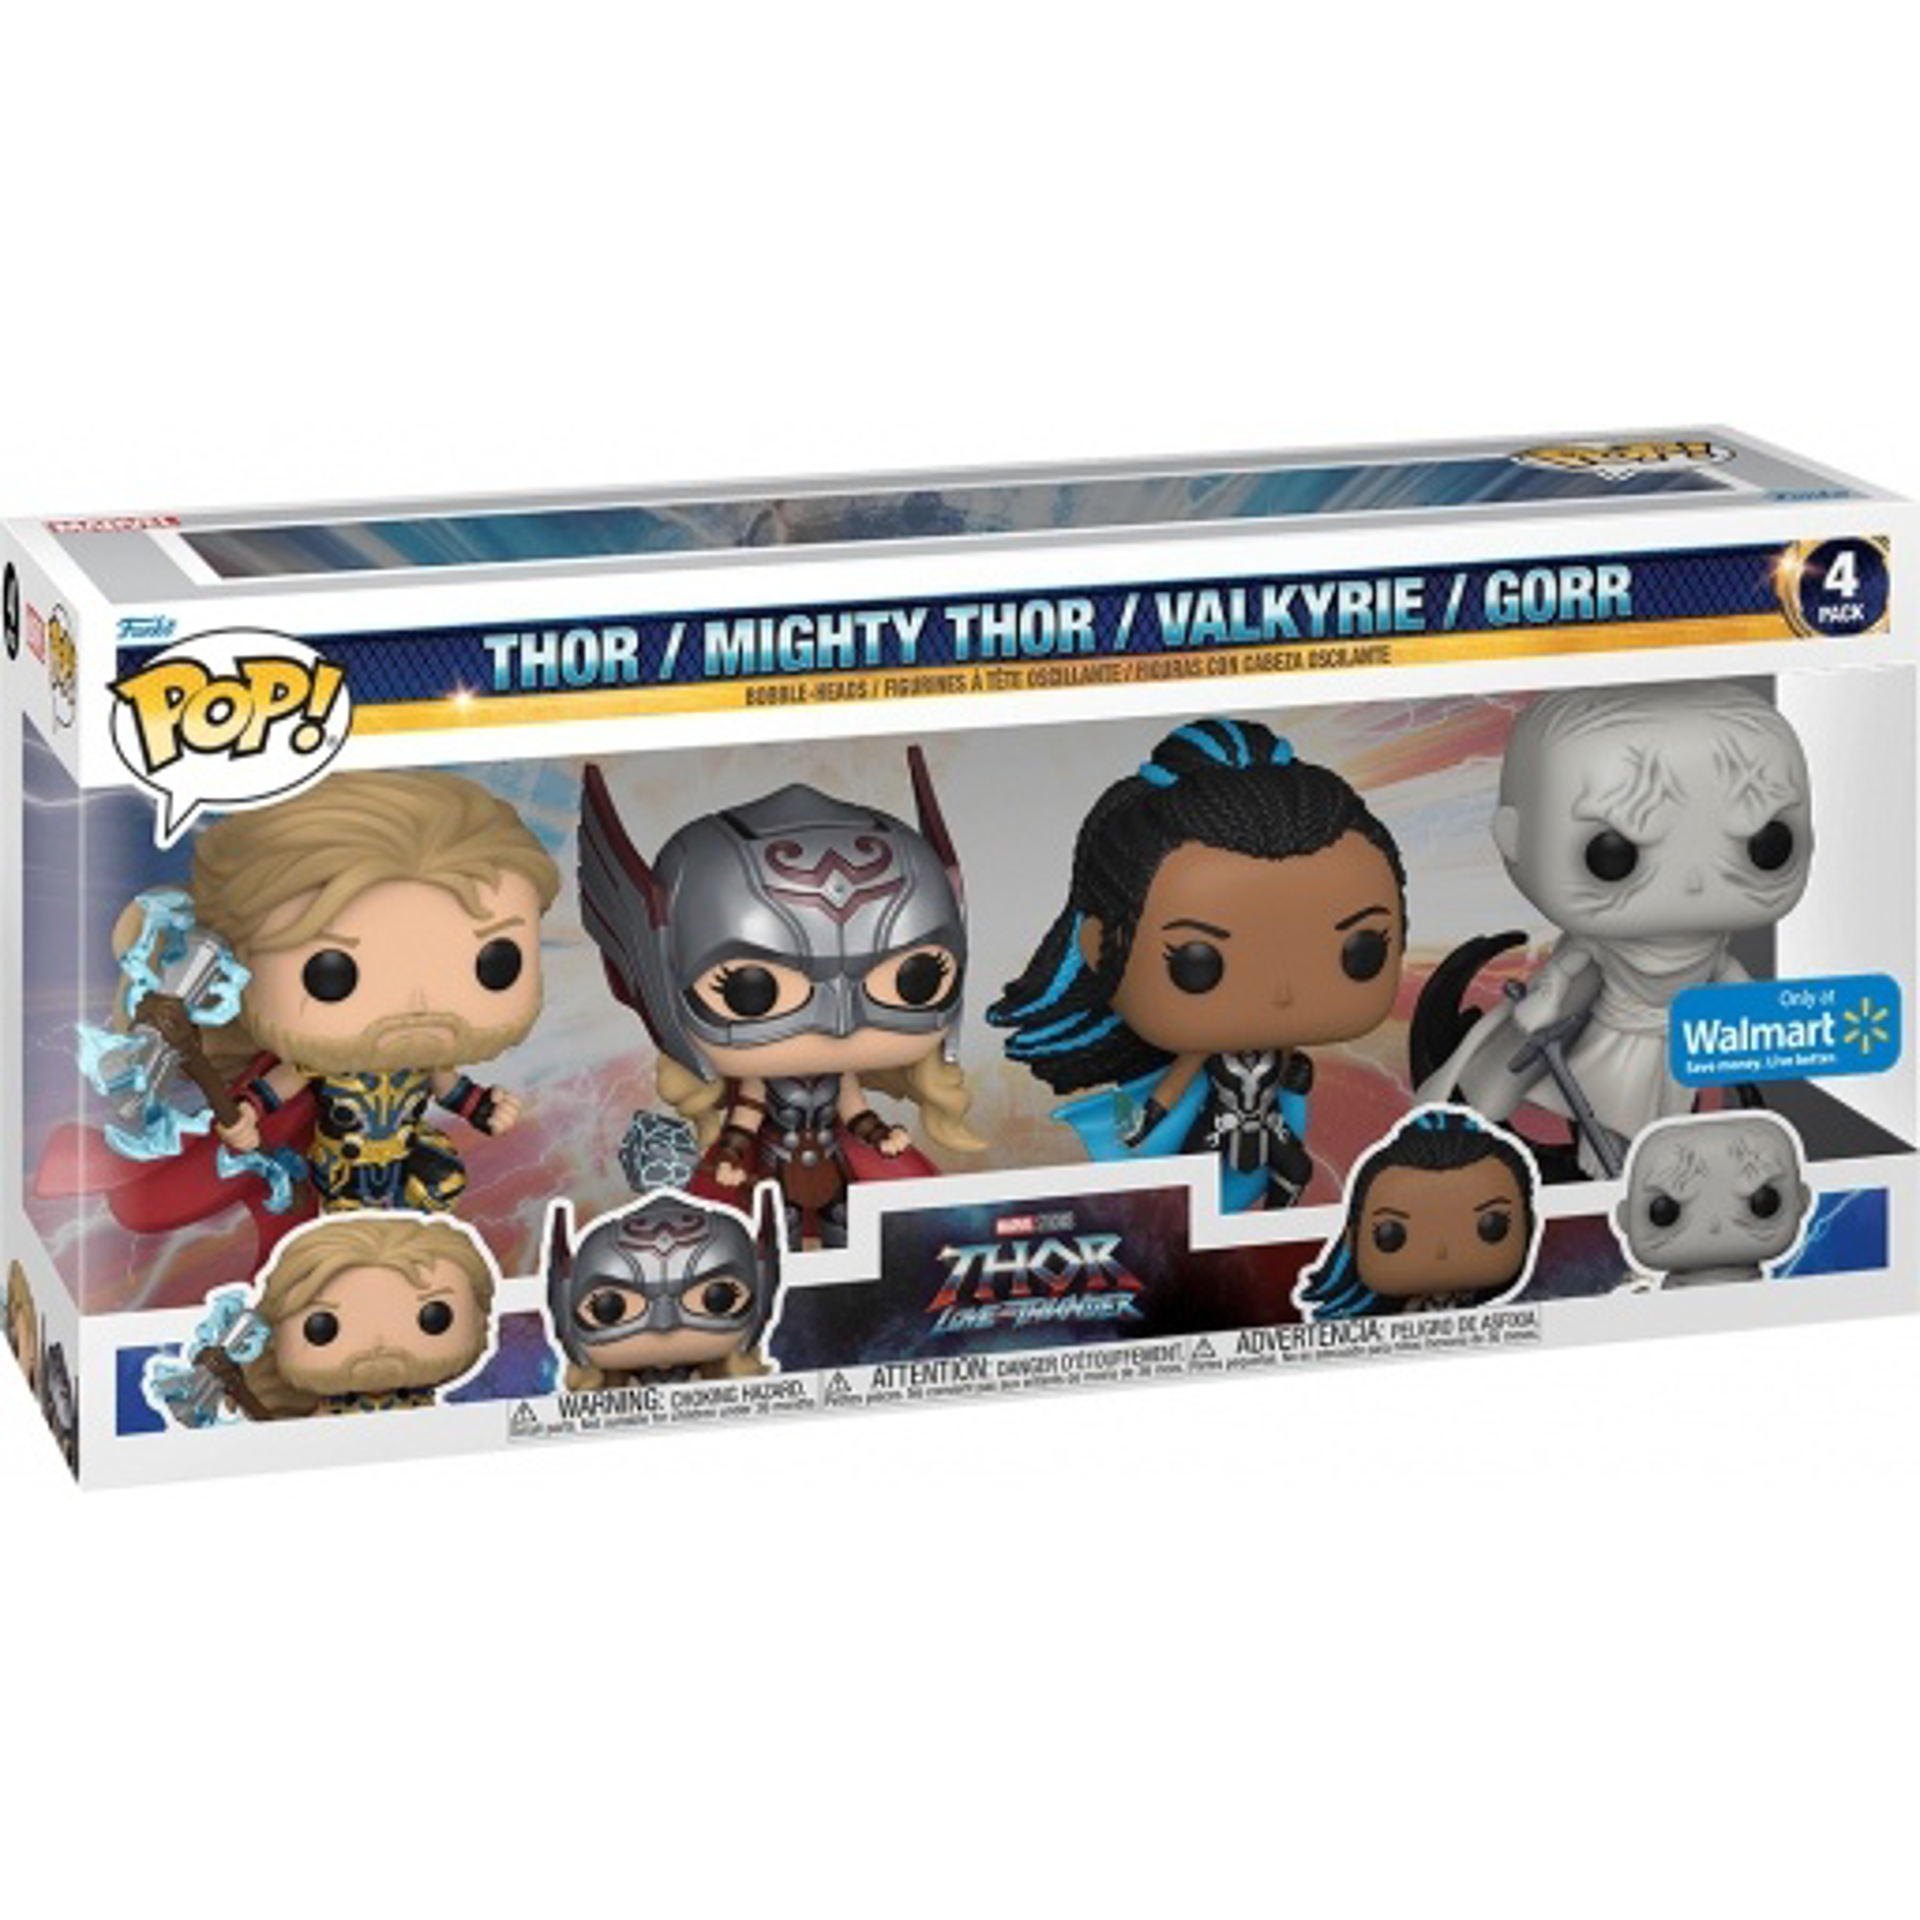 Funko Pop! 4-Pack: Marvel: Thor Love and Thunder - Thor / Mighty Thor / Valkyrie / Gorr